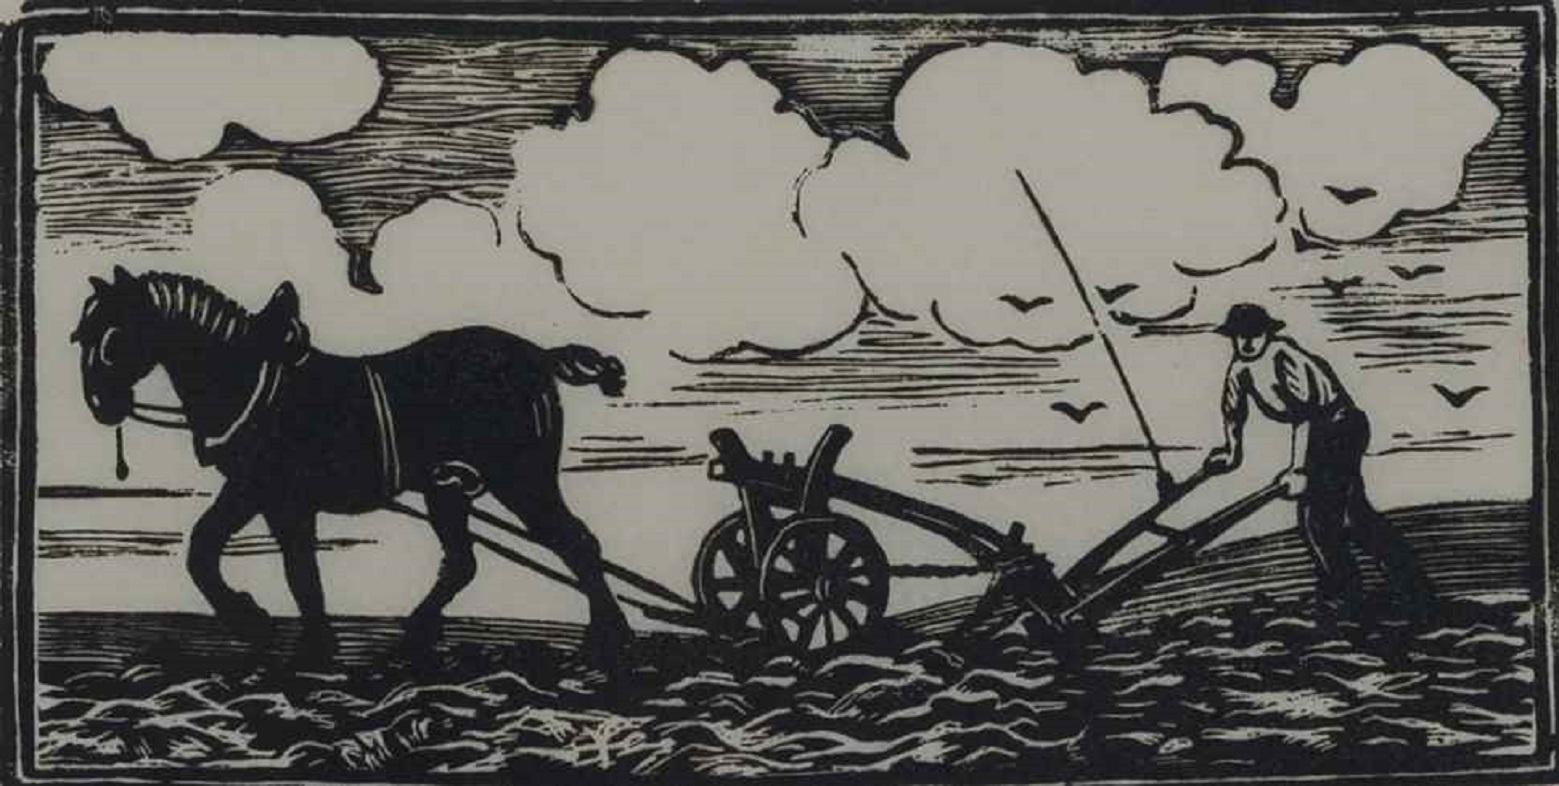 *UK BUYERS WILL PAY AN ADDITIONAL 20% VAT ON TOP OF THE ABOVE PRICE

Man Ploughing by Paulémile Pissarro (1884 - 1972)
Wood engraving
7 x 13 cm (2 ³/₄ x 5 ¹/₈ inches)
Signed lower right, Paulémile Pissarro and numbered lower left, 4/5

Artist's